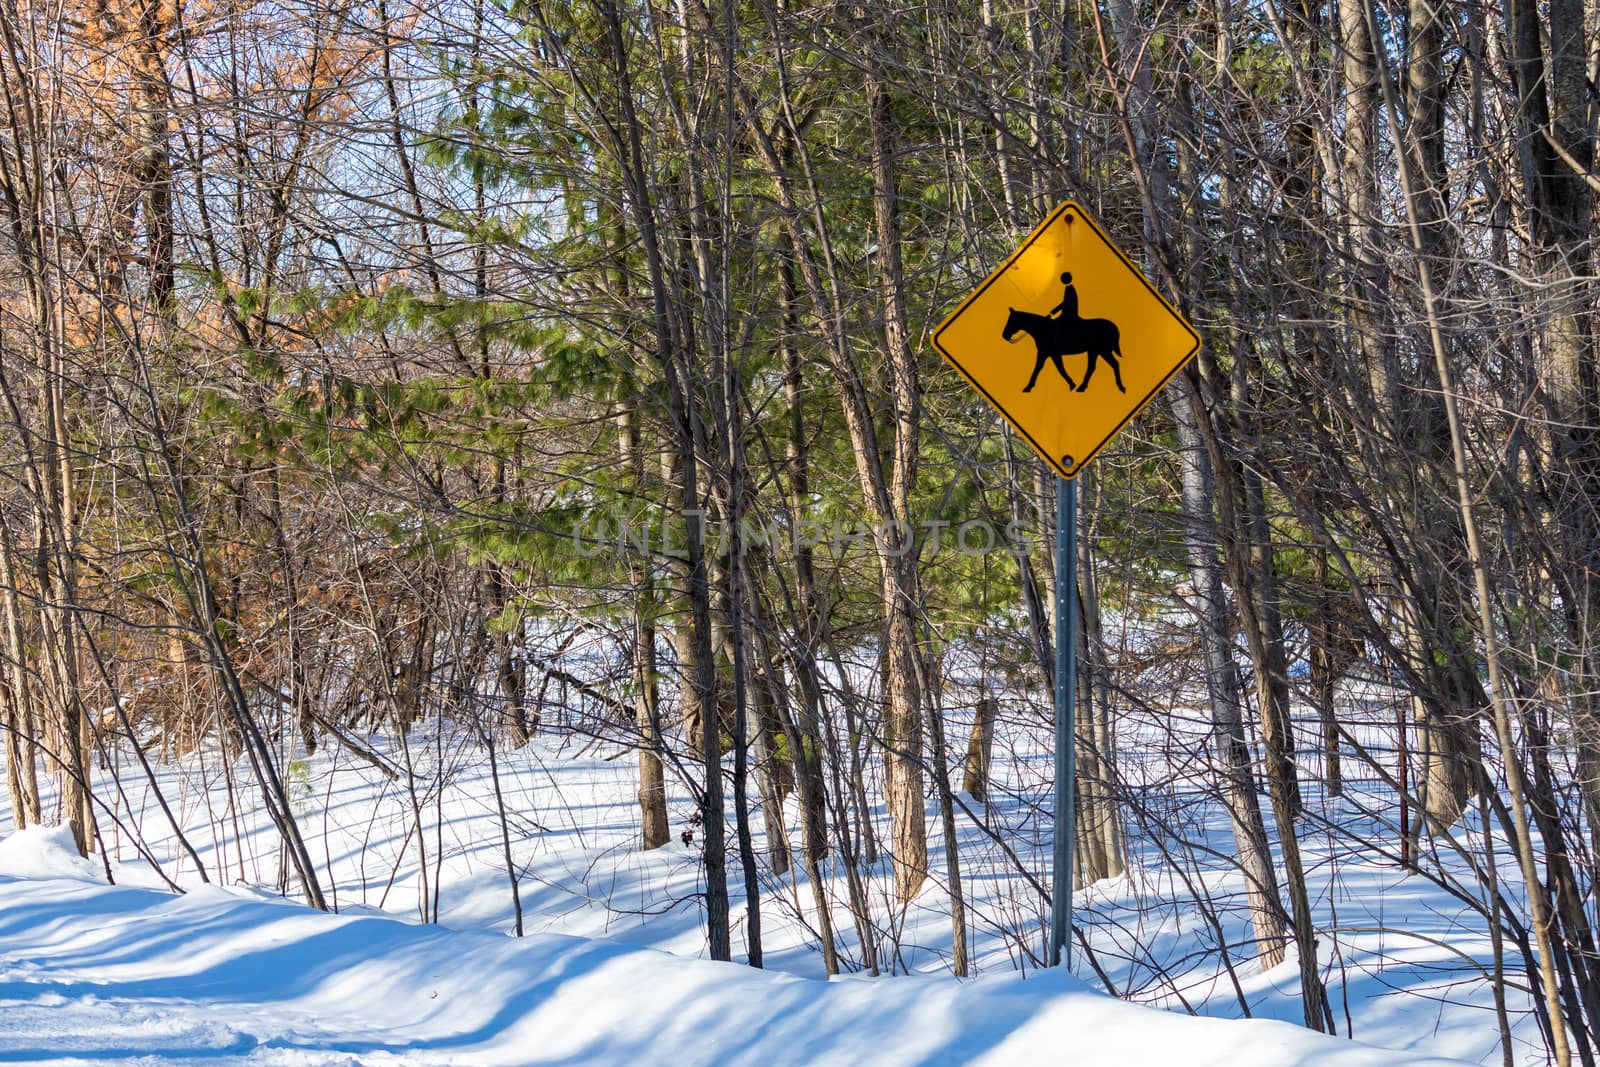 Horseback crossing sign on rural road in winter by colintemple